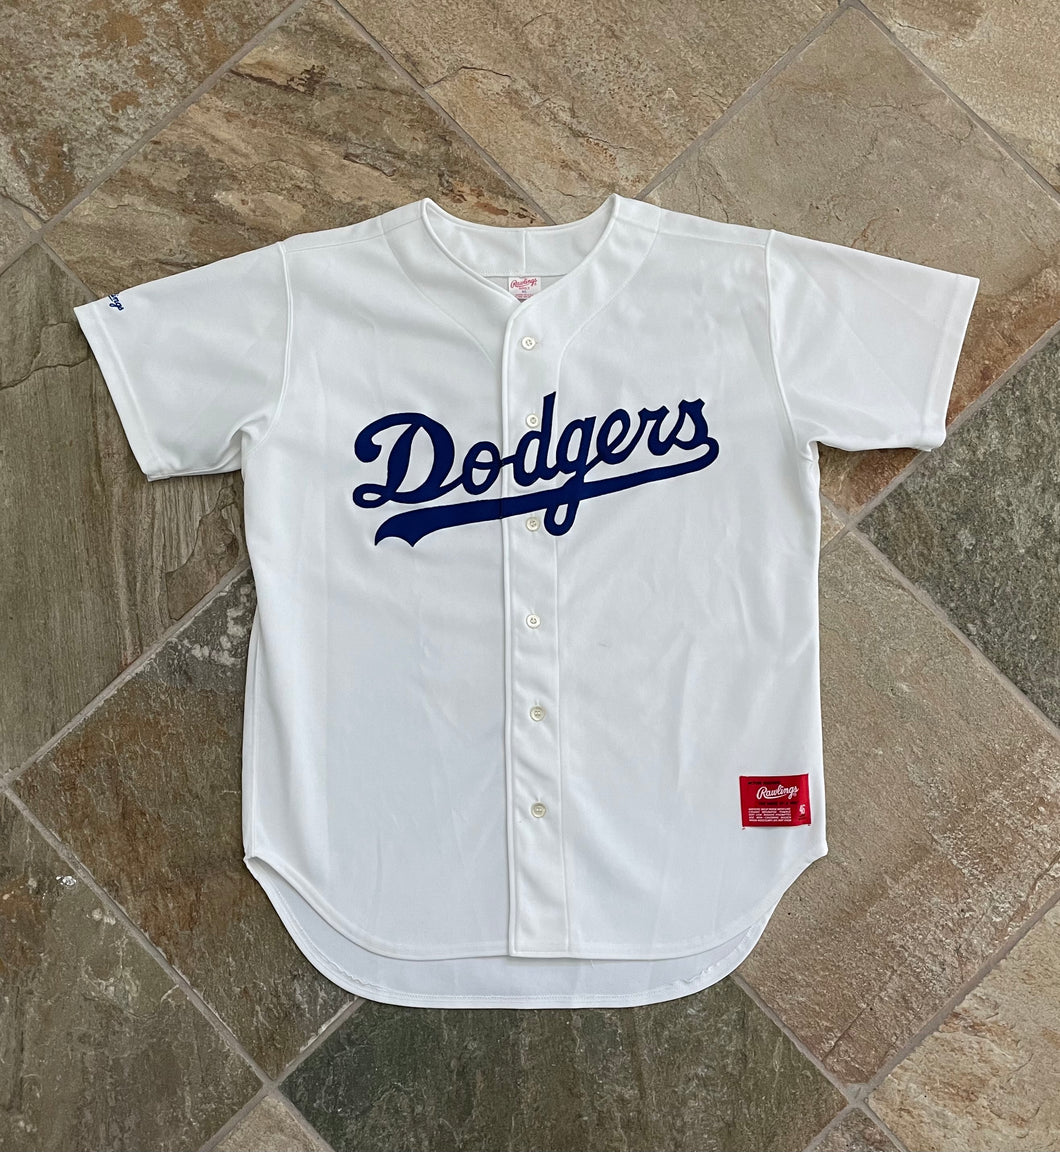 Vintage Authentic Los Angeles Dodgers Jersey at